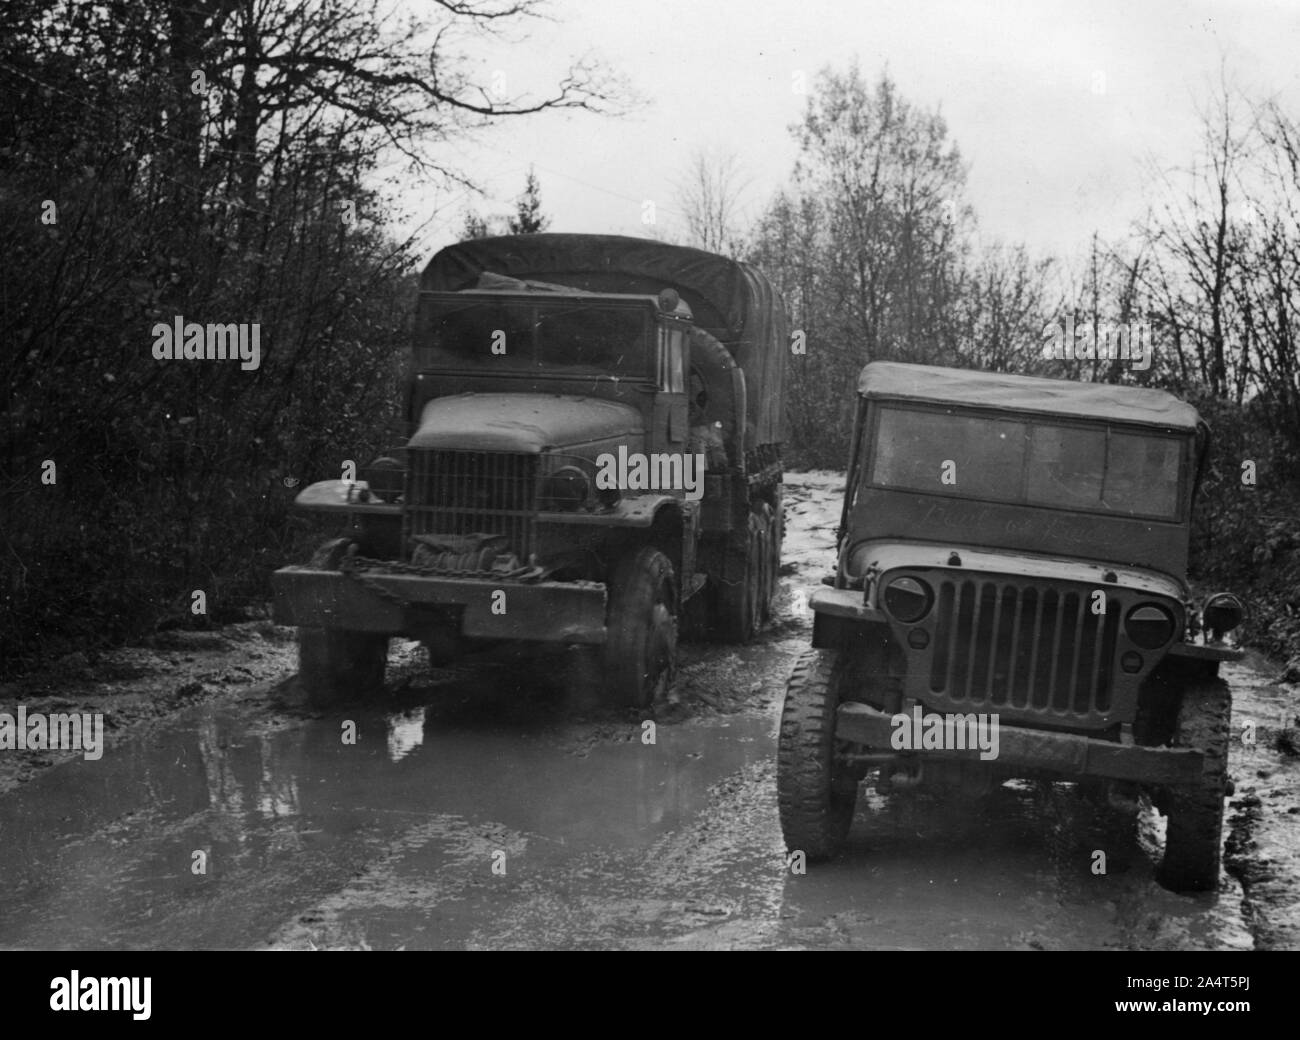 GMC CCKW 352 et Willys Jeep vers 1944. Banque D'Images